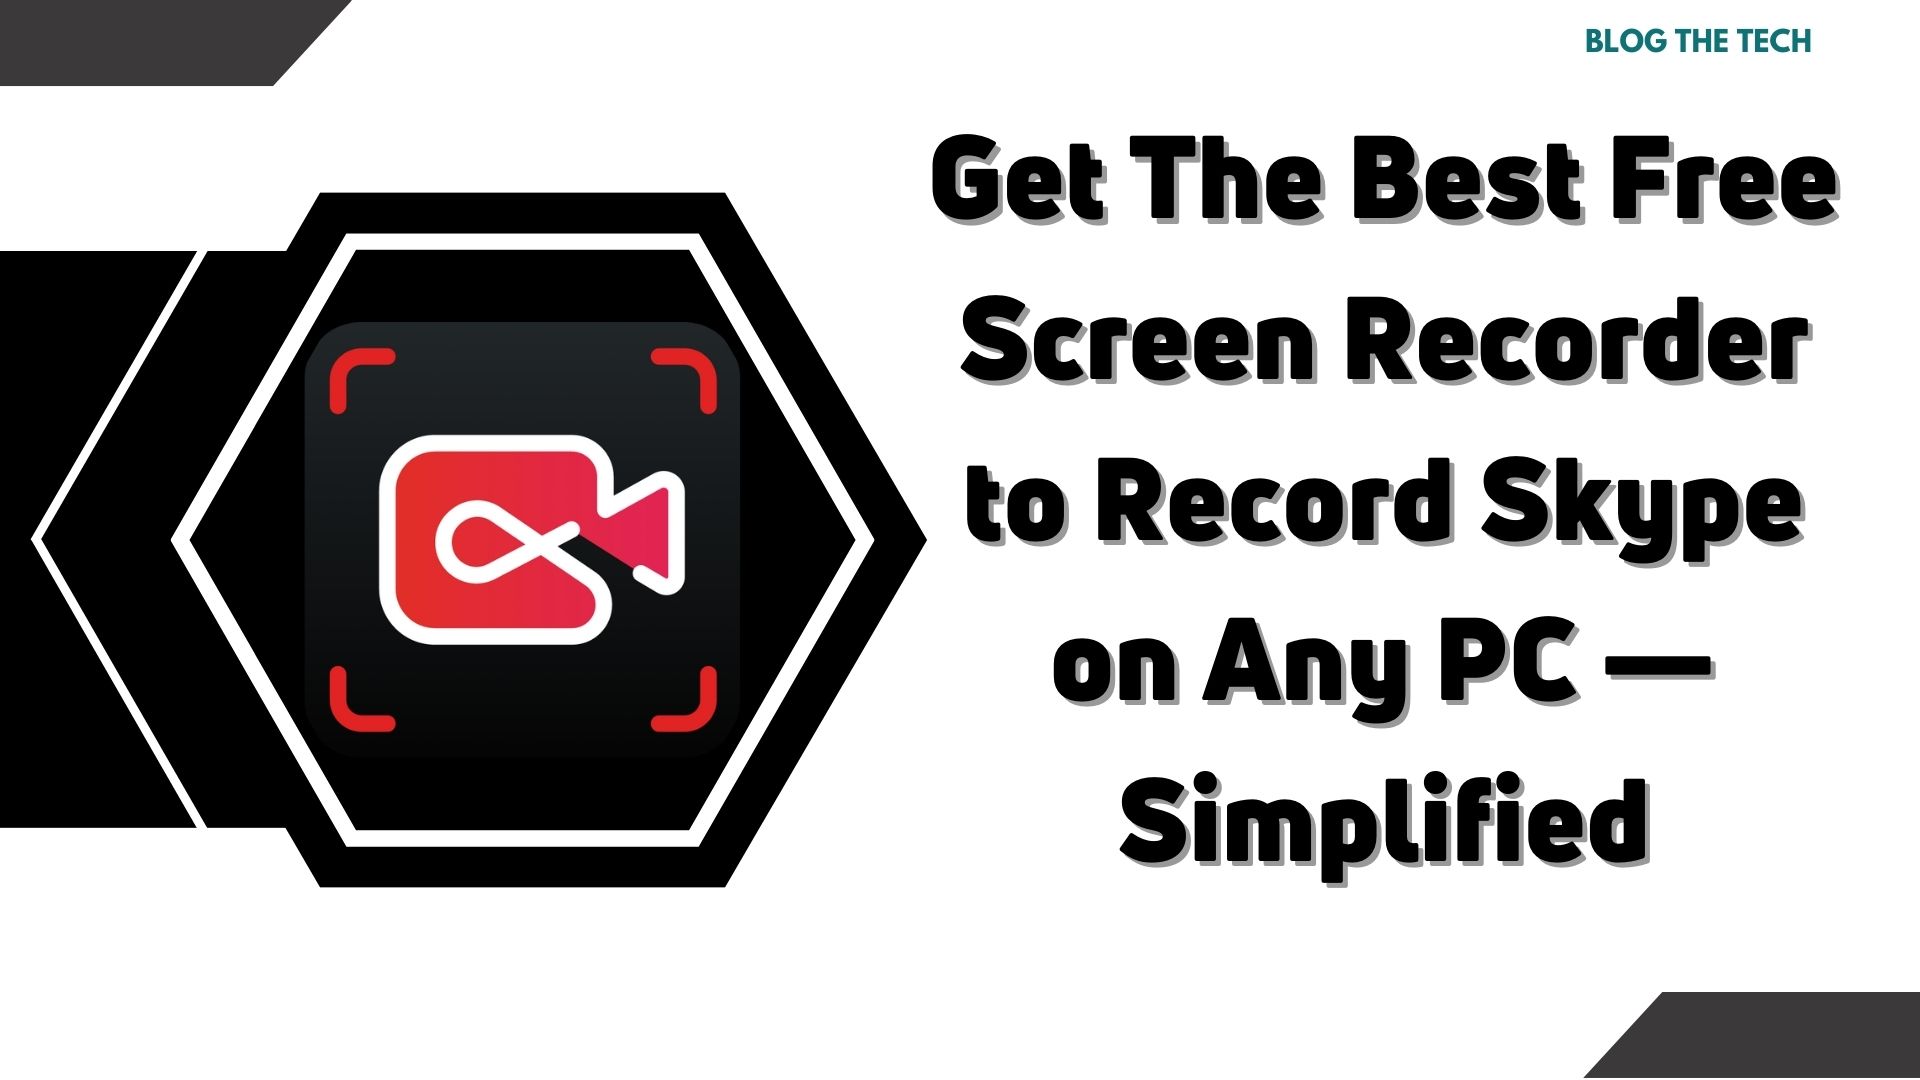 Get The Best Free Screen Recorder to Record Skype on Any PC — Simplified